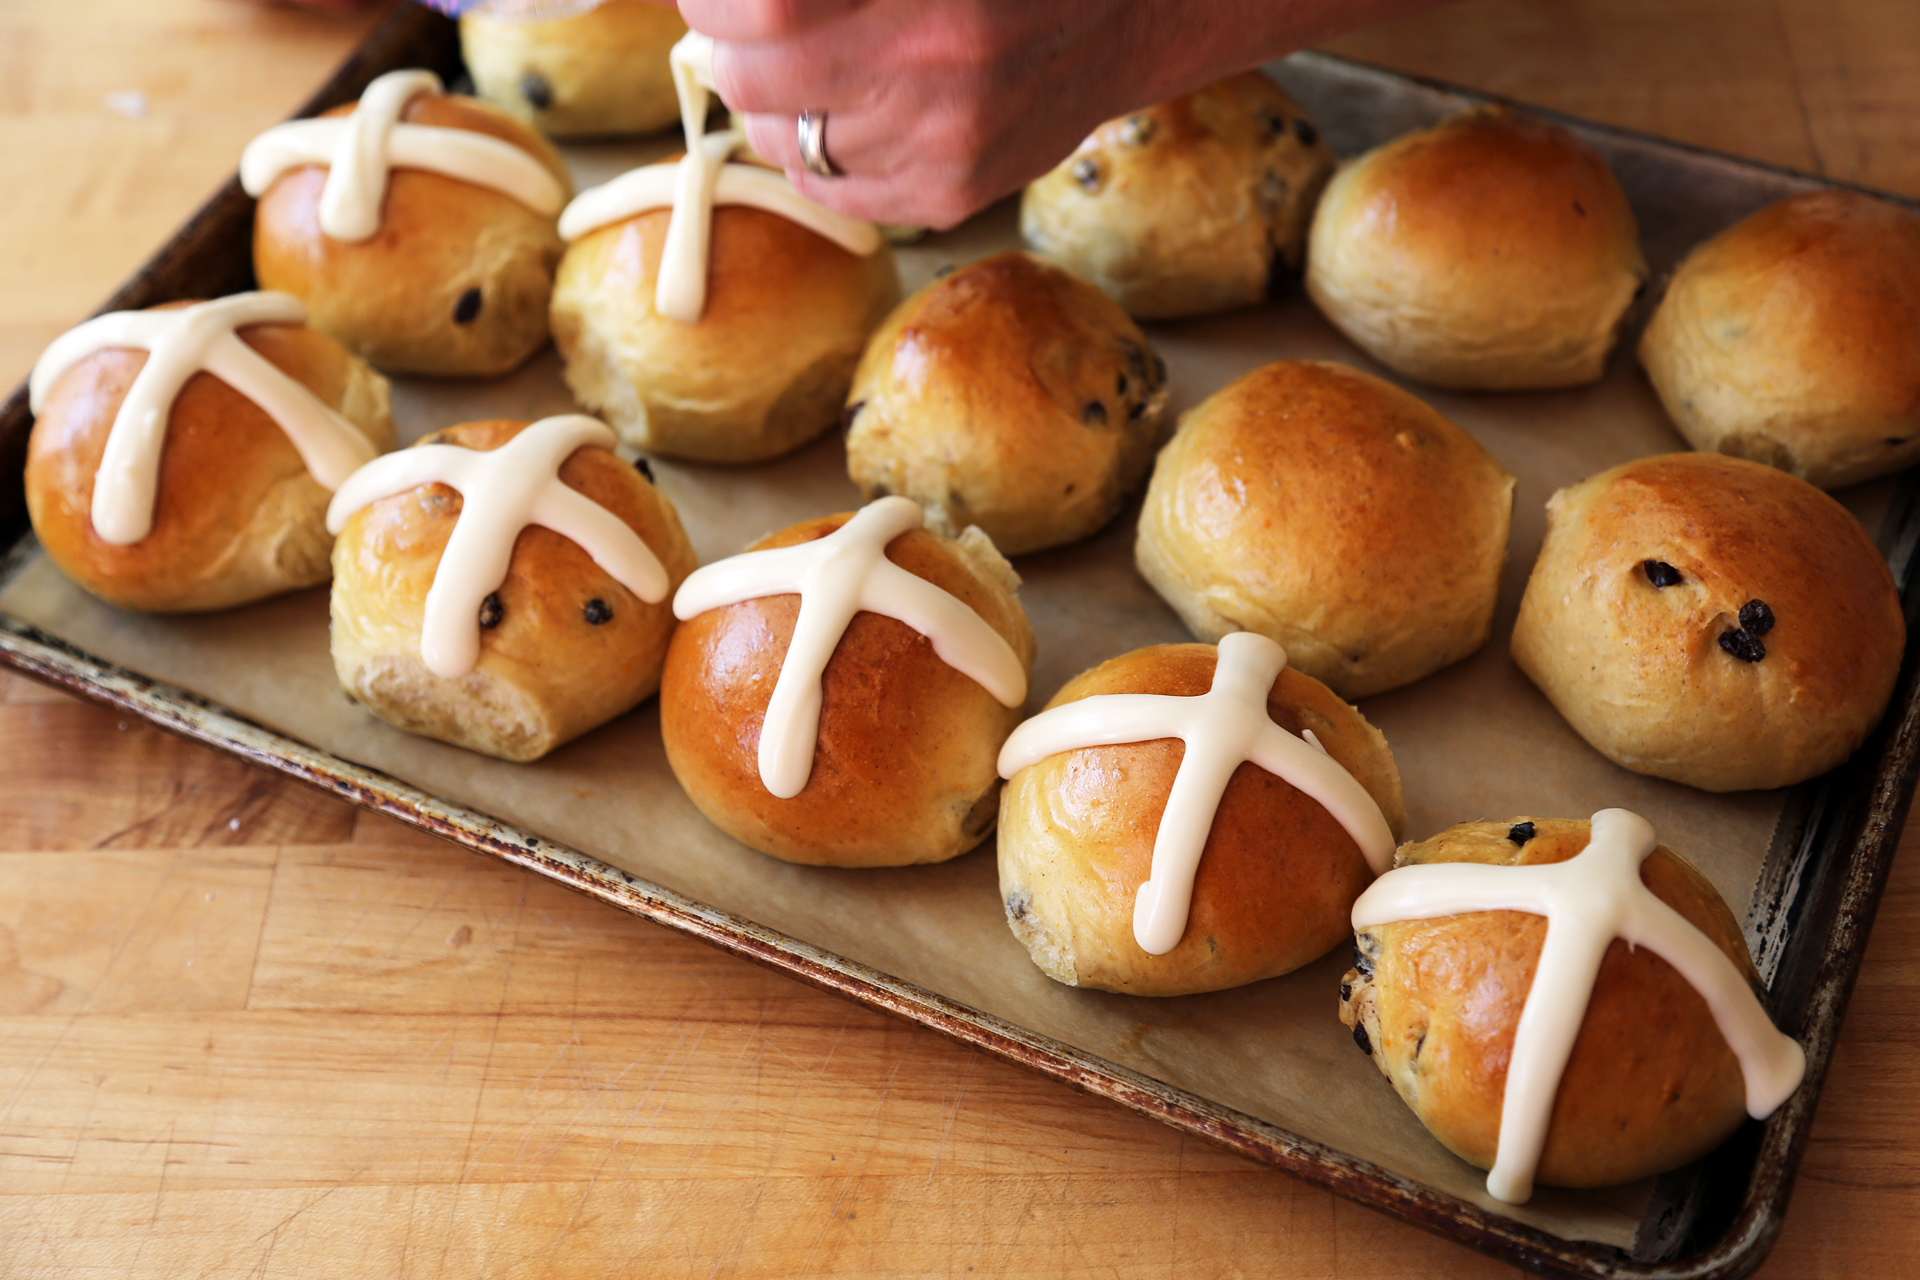 Traditionally the crosses are made with a flour paste piped on before baking. But I’m just not crazy about that and frankly, I like the sticky sweet icing.